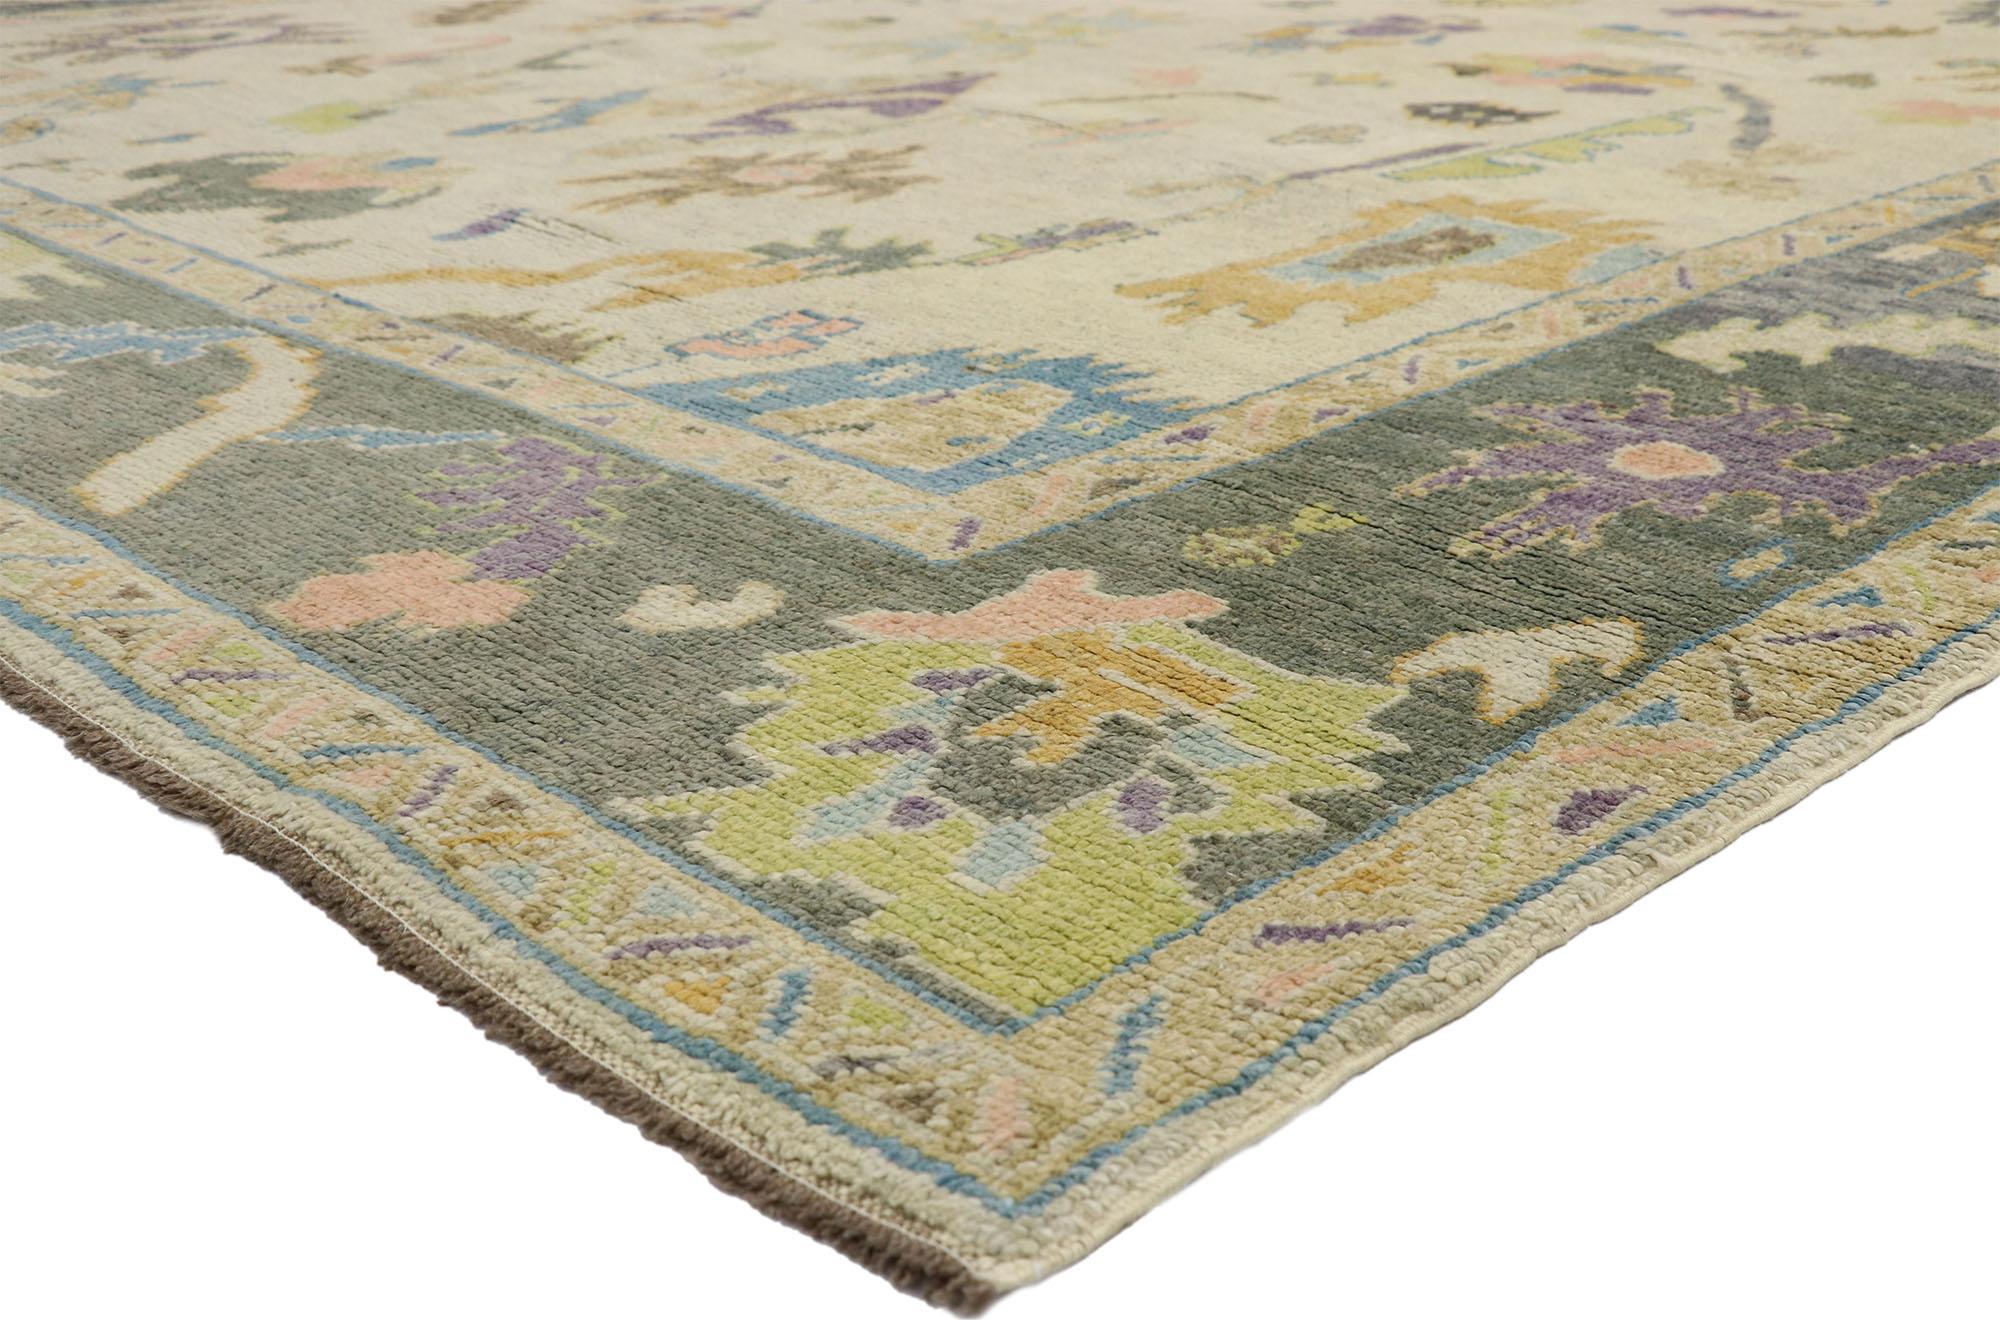 52528, contemporary Turkish Oushak rug with pastel colors and French Transitional style. Highly stylish yet tastefully casual, this new colorful Turkish Oushak rug features an all-over geometric pattern composed of Harshang motifs, blooming